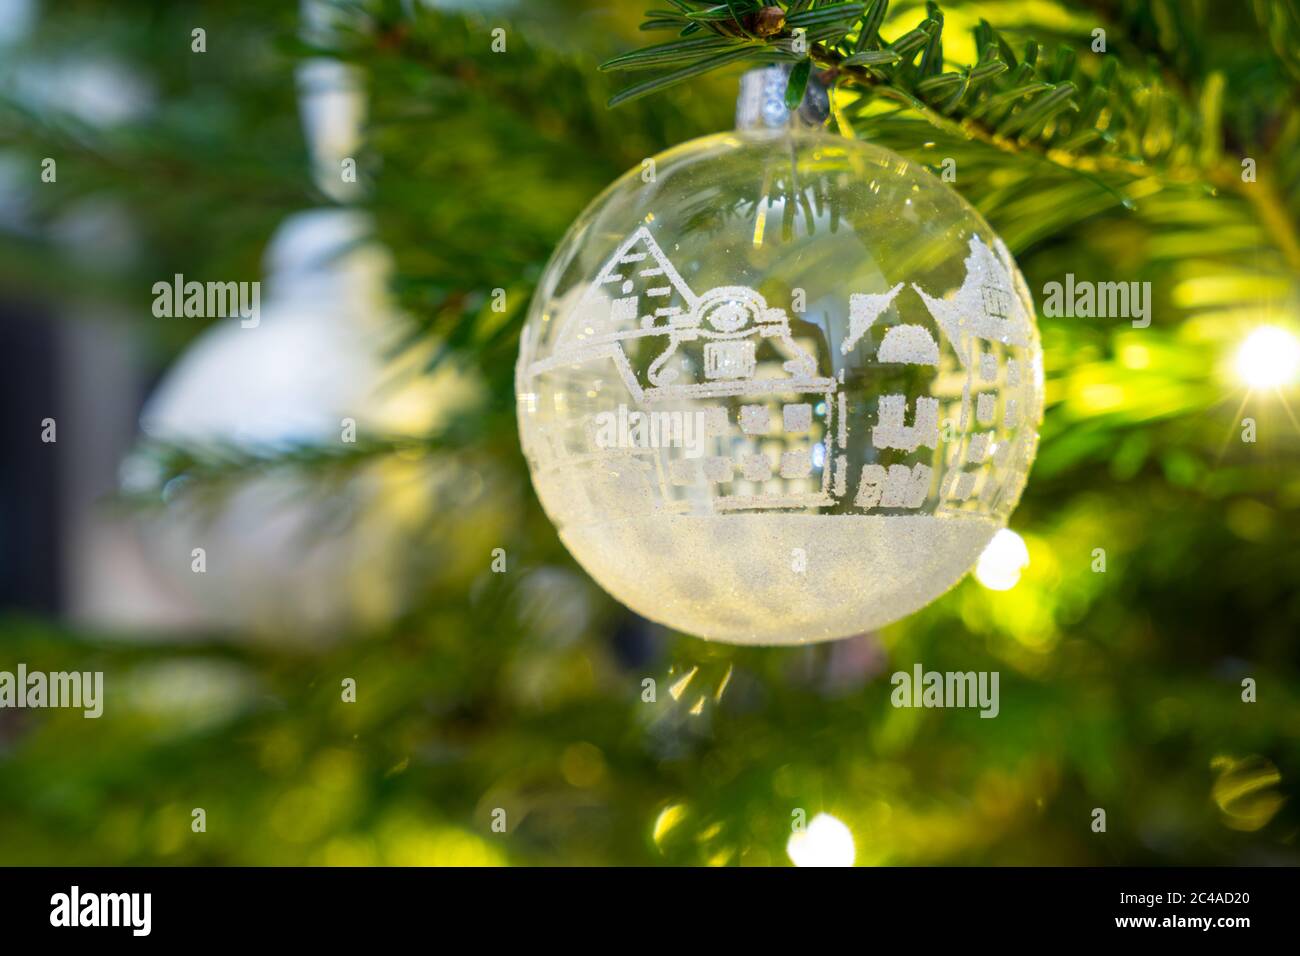 Christmas decoration ornaments  from glass with white and silver hanging in a christmas tree with lights Stock Photo